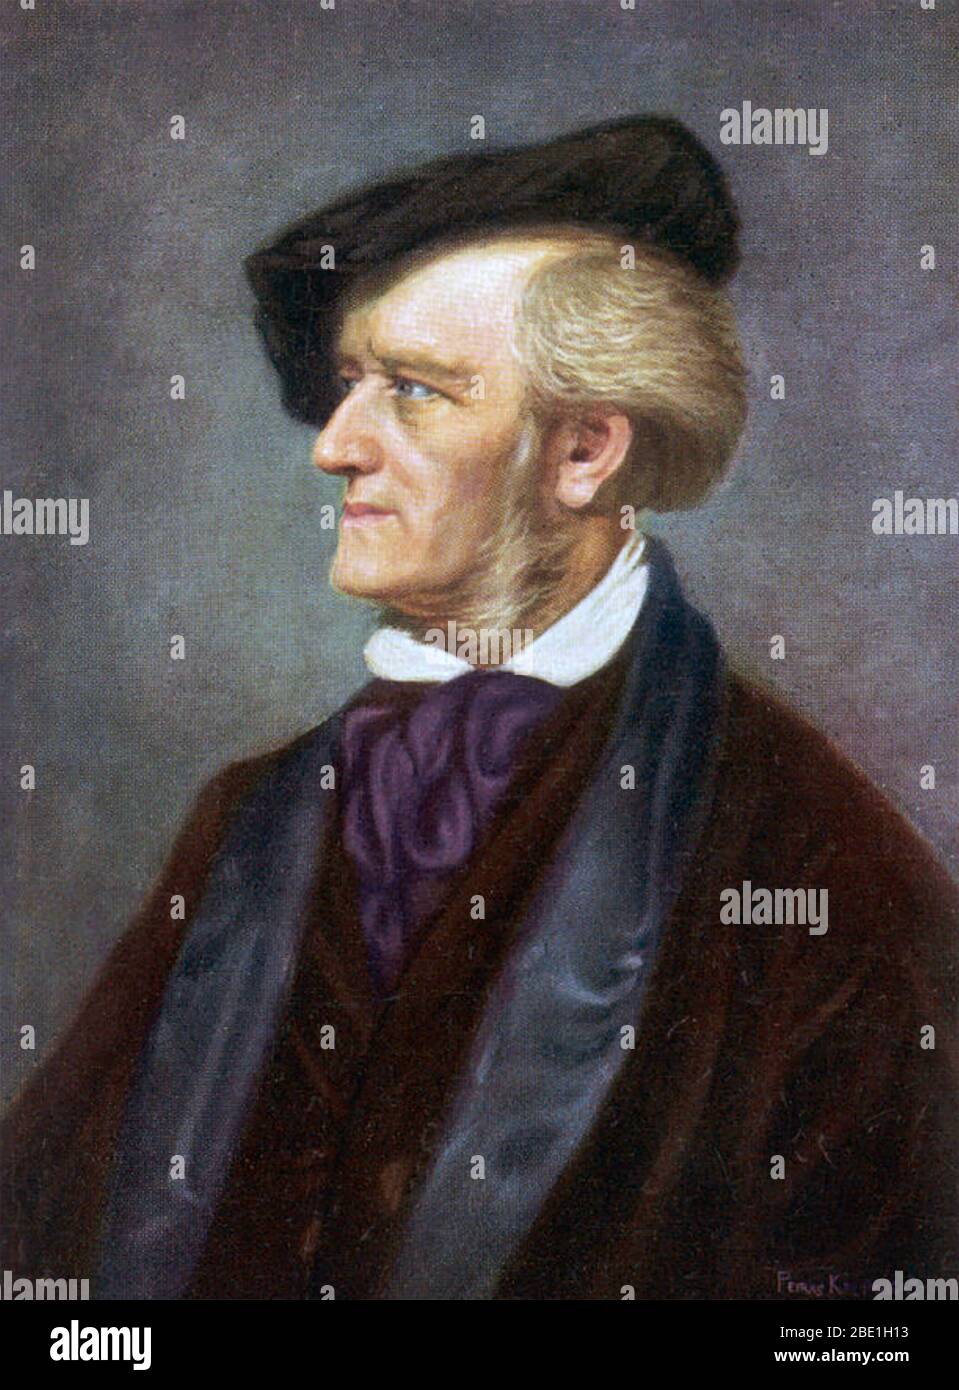 RICHARD WAGNER (1813-1883) German composer and theatre director about 1870 Stock Photo